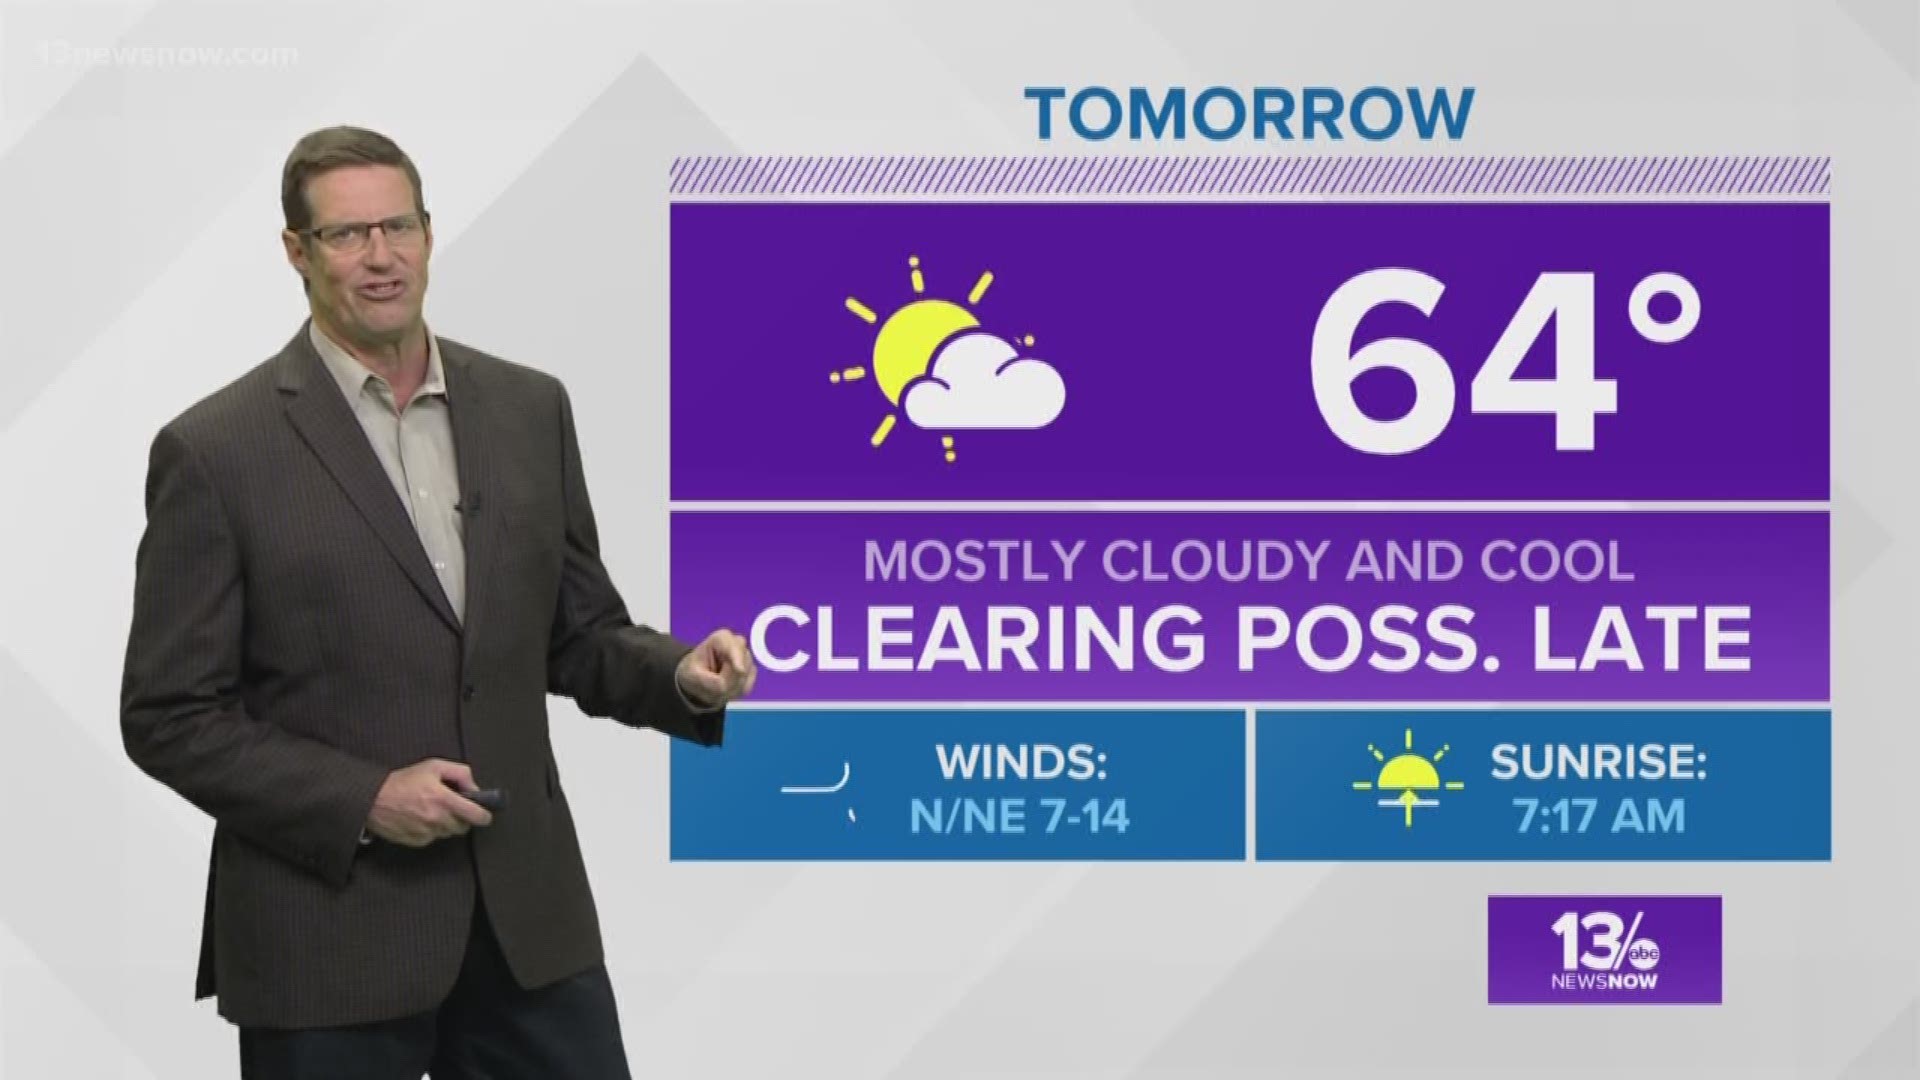 Chief Meteorologist Jeff Lawson brings you the forecast from the Weather Authority.